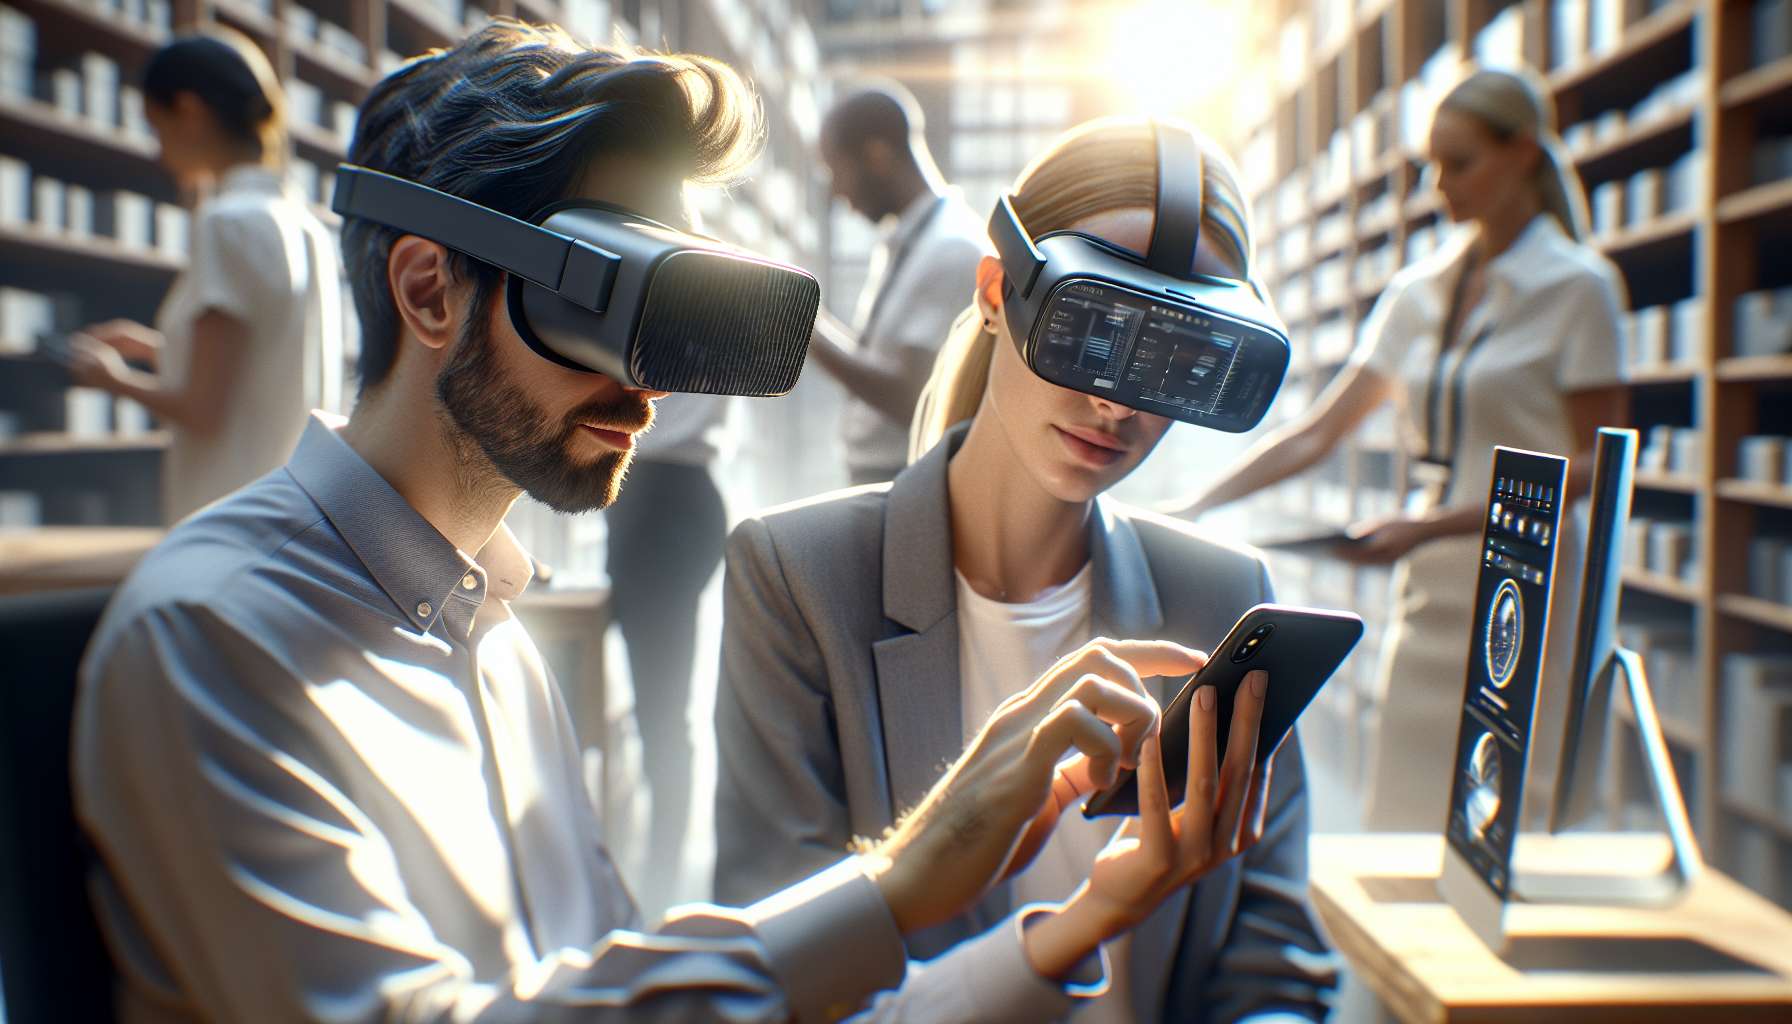 Redefining B2B E-Commerce: The Future with AR